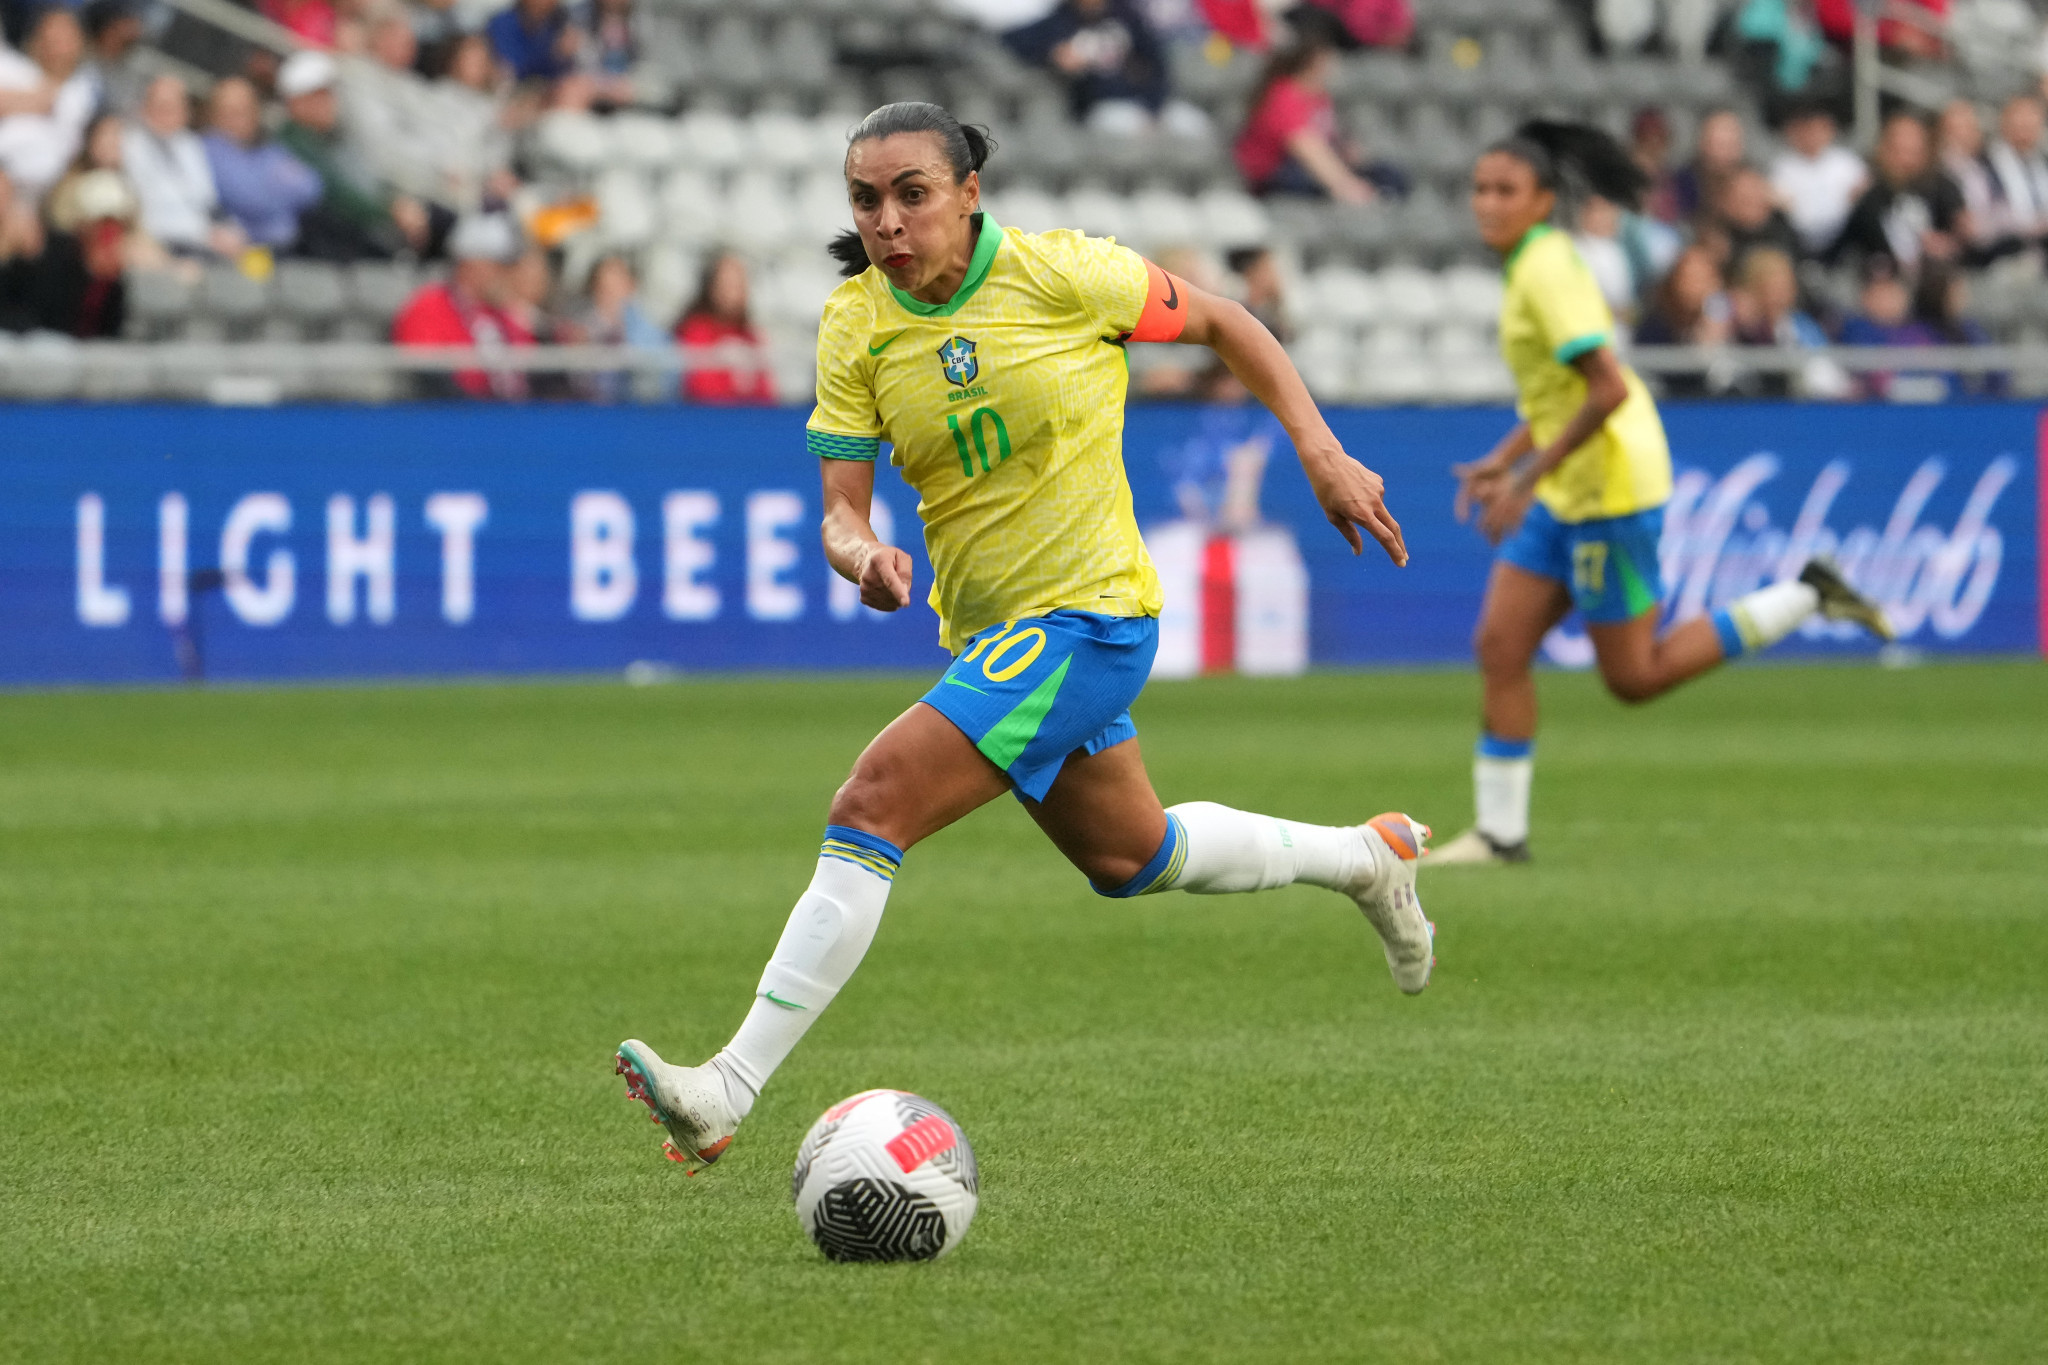 Marta plans to stay involved in football through her country's federation. GETTY IMAGES